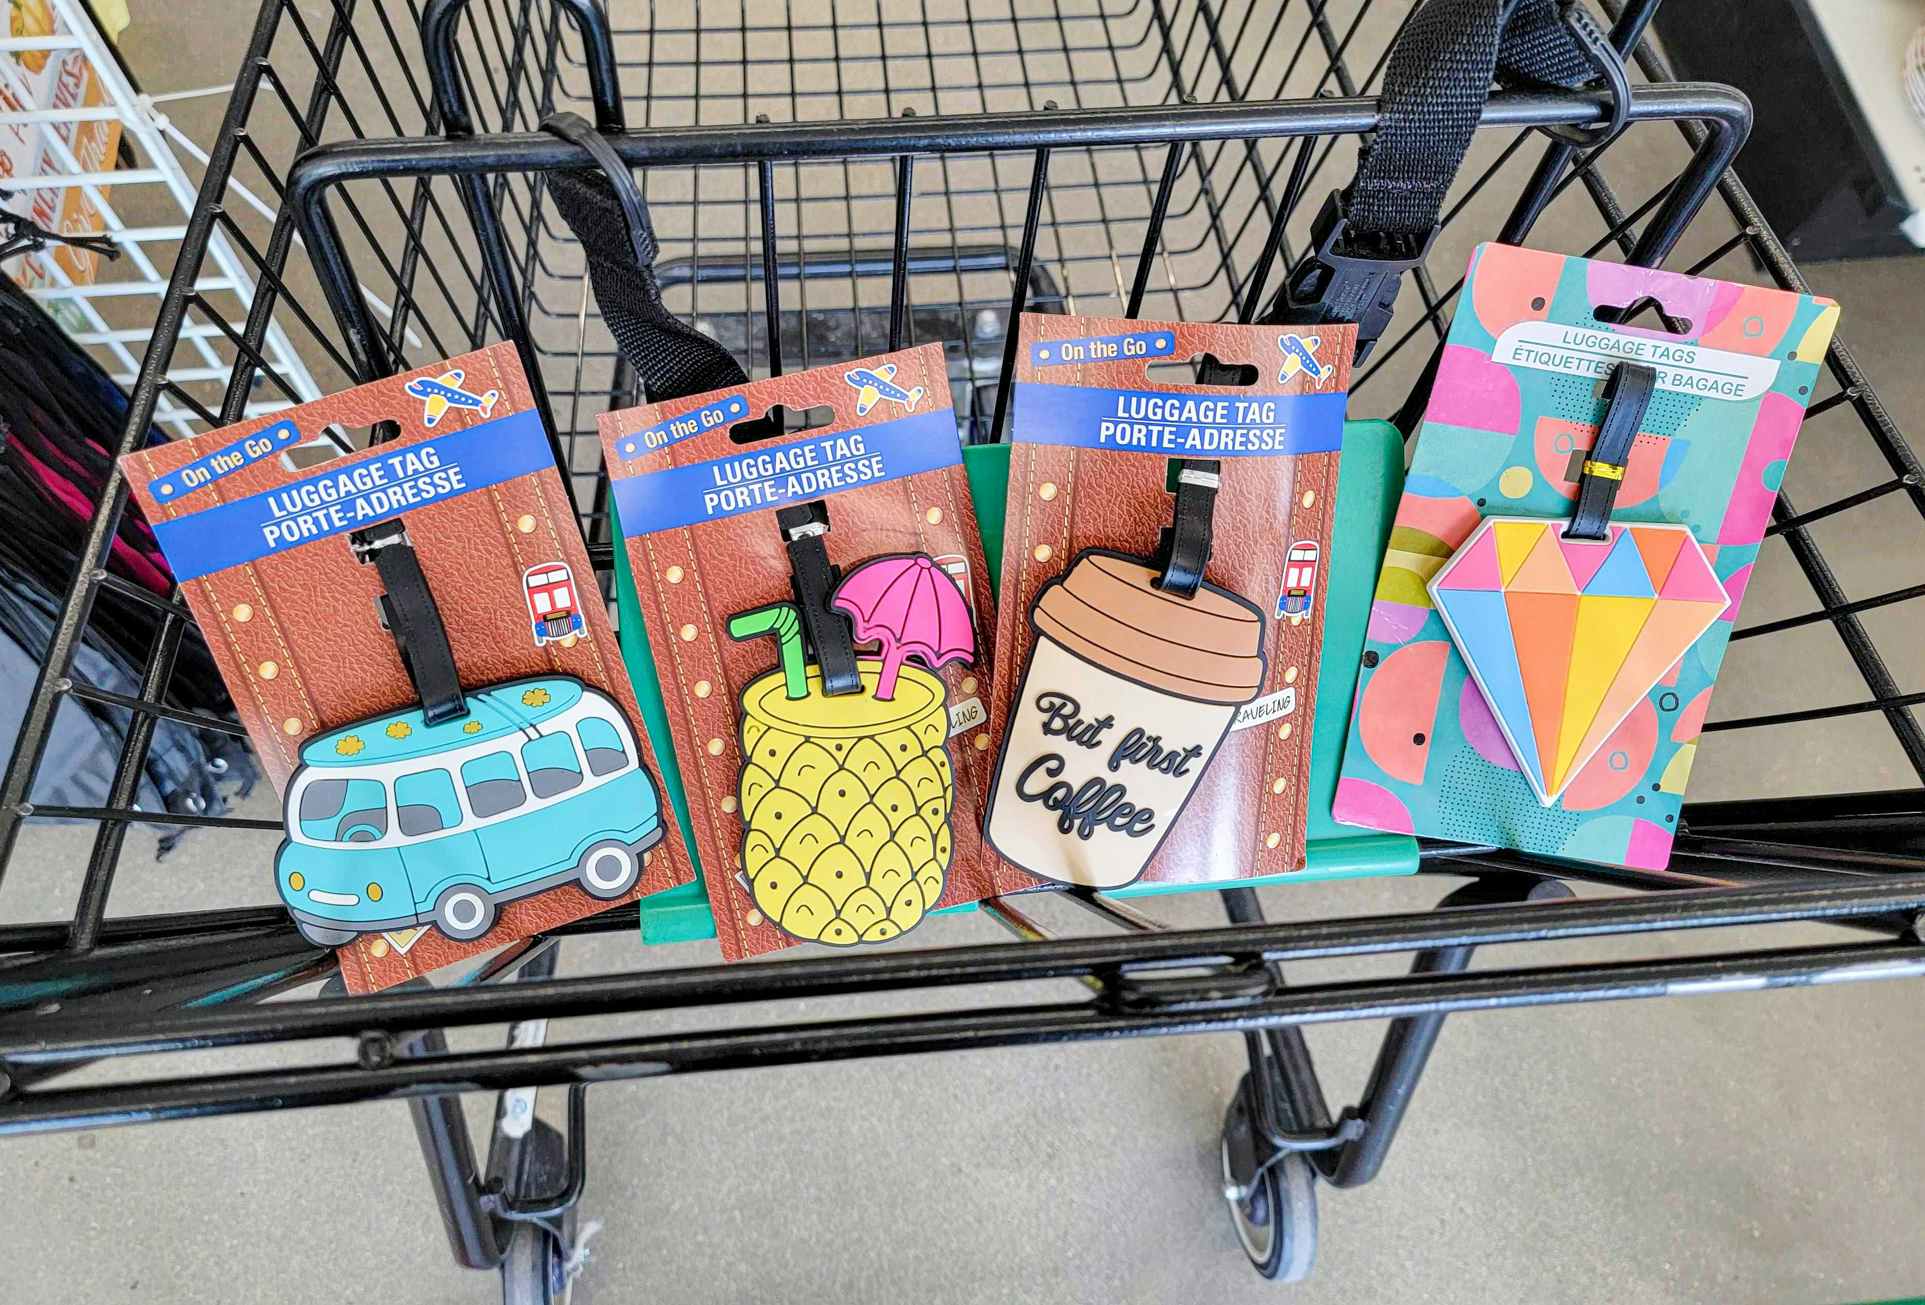 4 novelty luggage tags in a cart